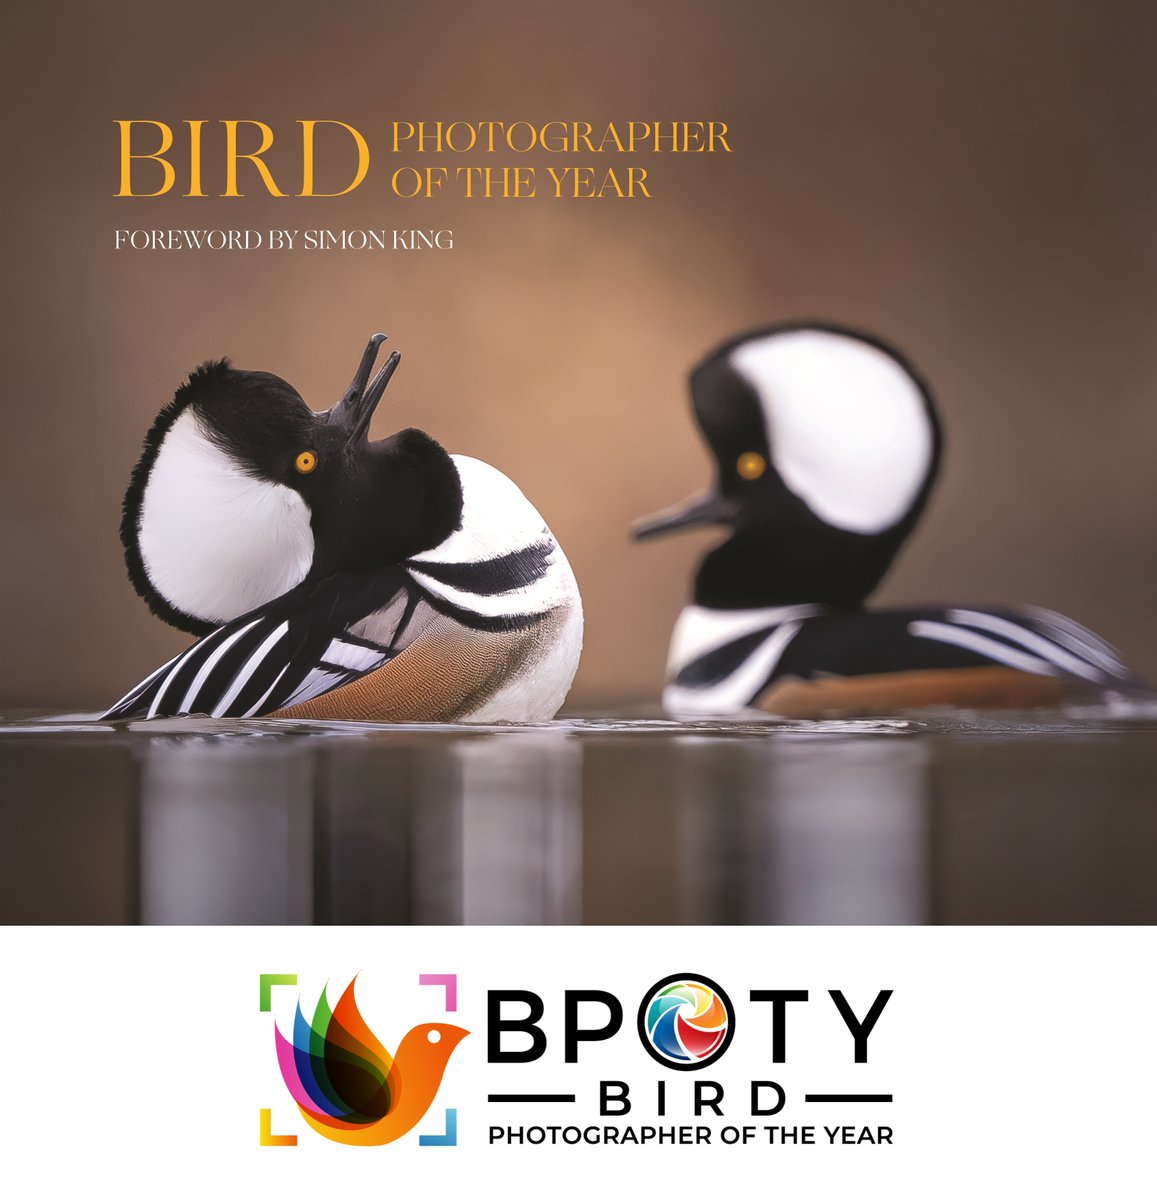 We are delighted to share plans to publish Bird Photographer of the Year in North America and the UK this autumn. The book will be released in both markets on September 24, the same day winners of the annual @BirdPOTY competition are announced. Read more: hubs.ly/Q02spPyy0